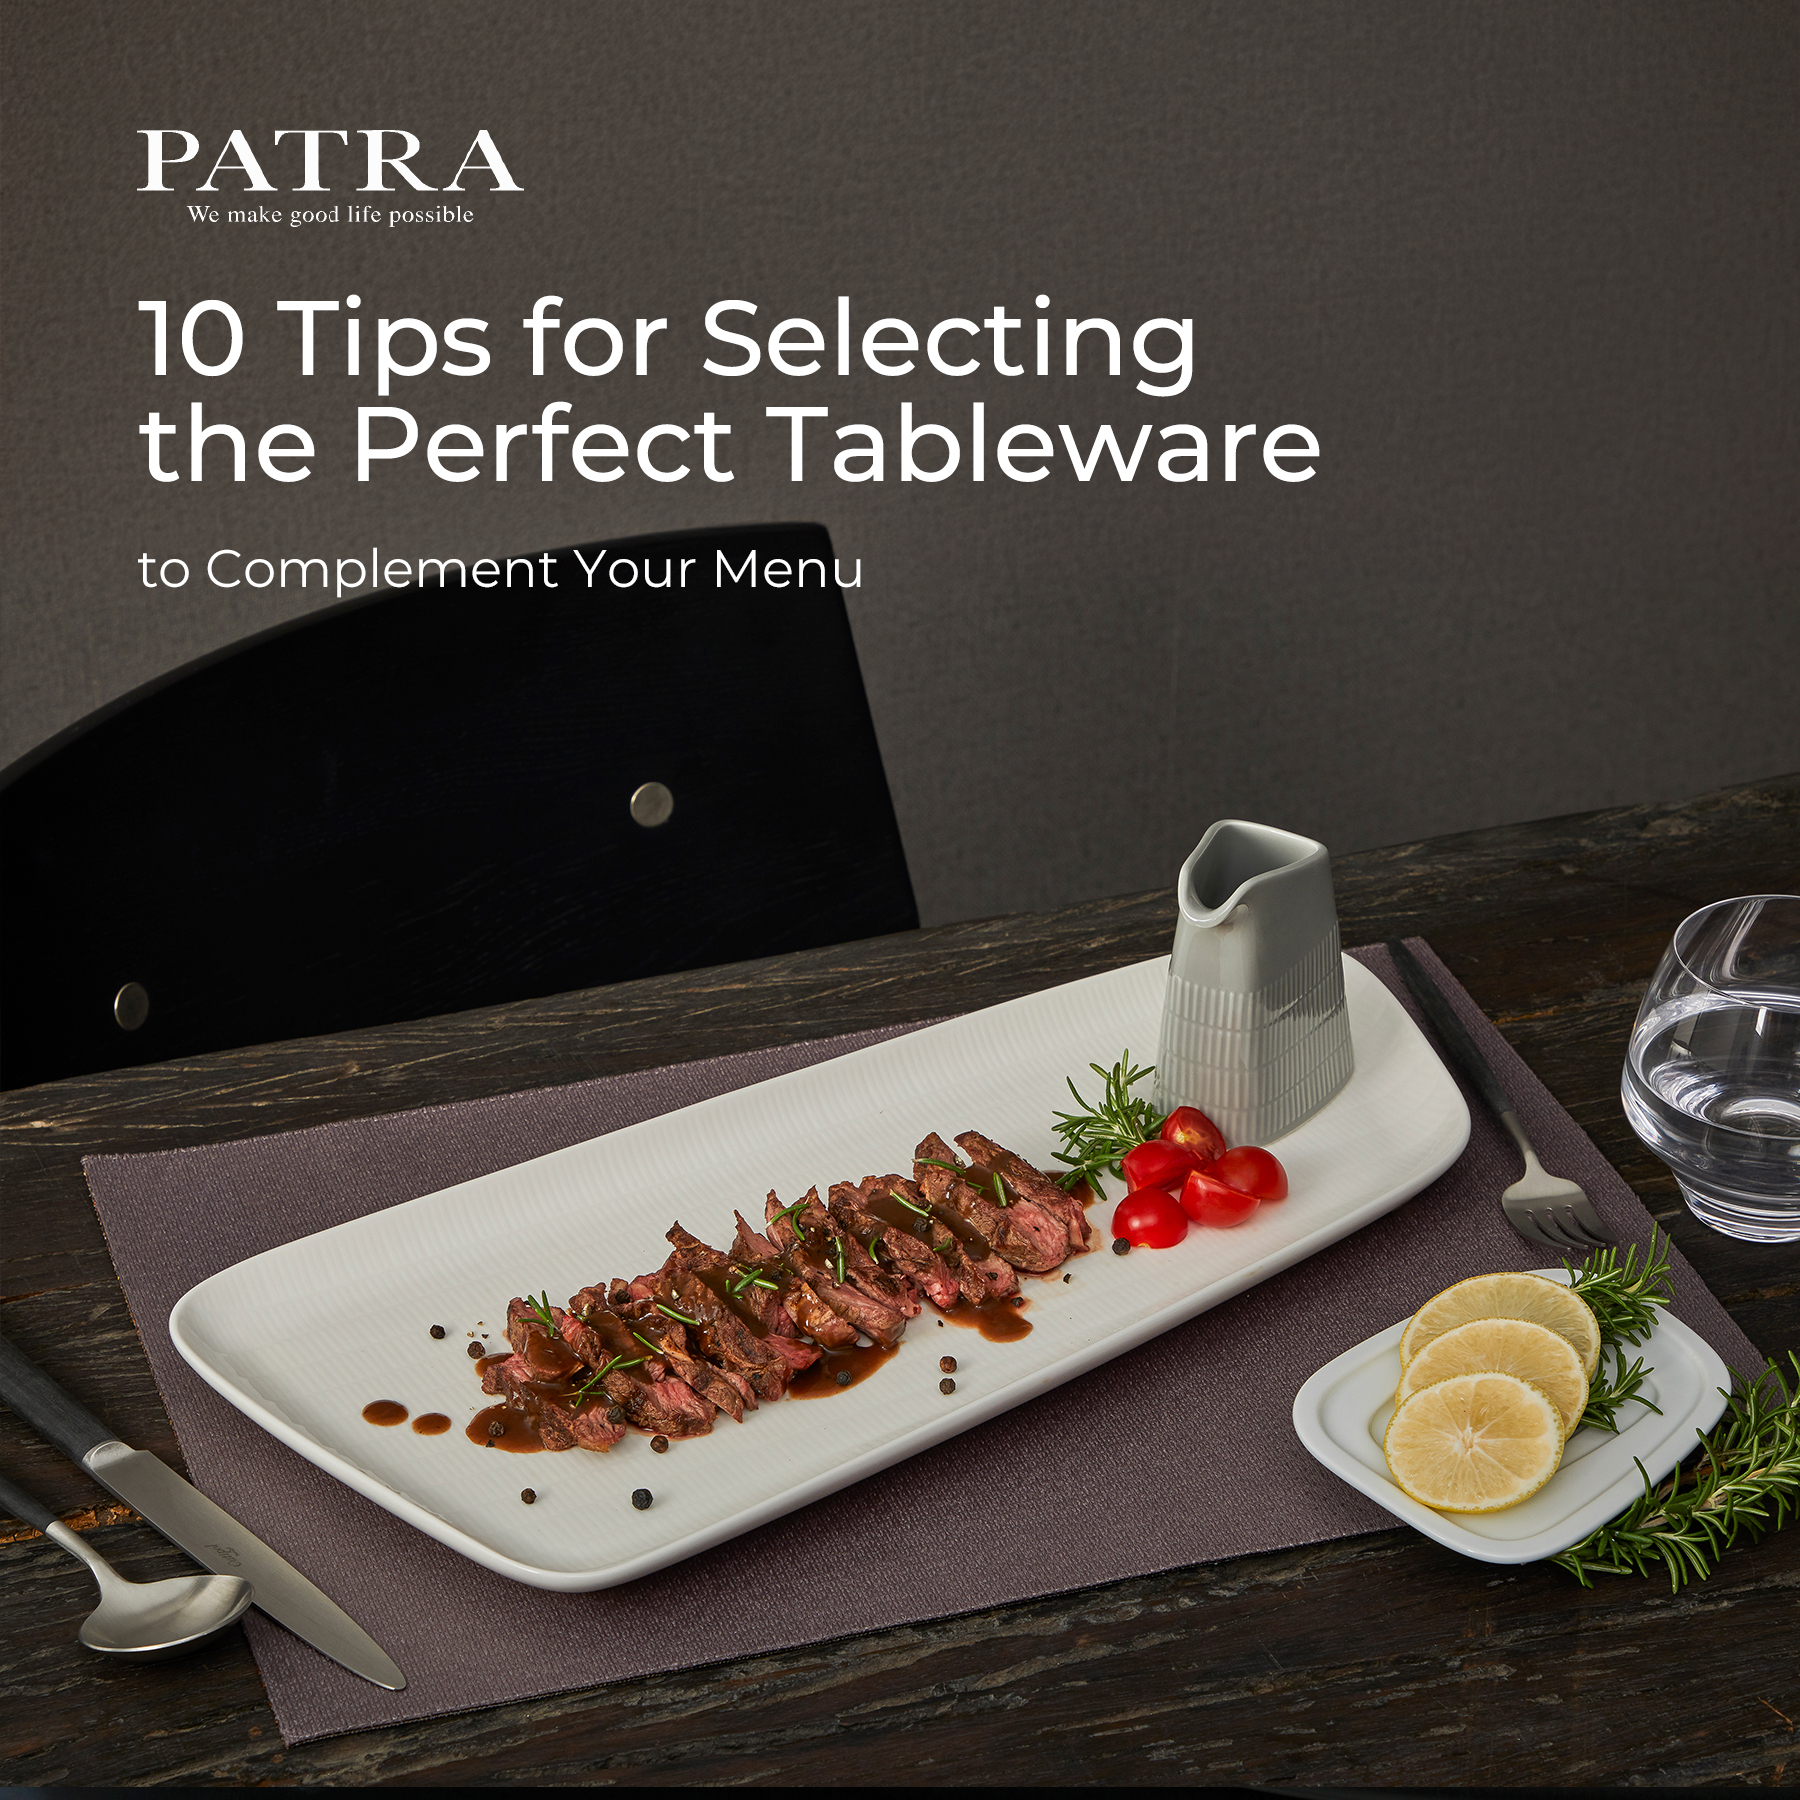 10 Tips for Selecting the Perfect Tableware to Complement Your Menu